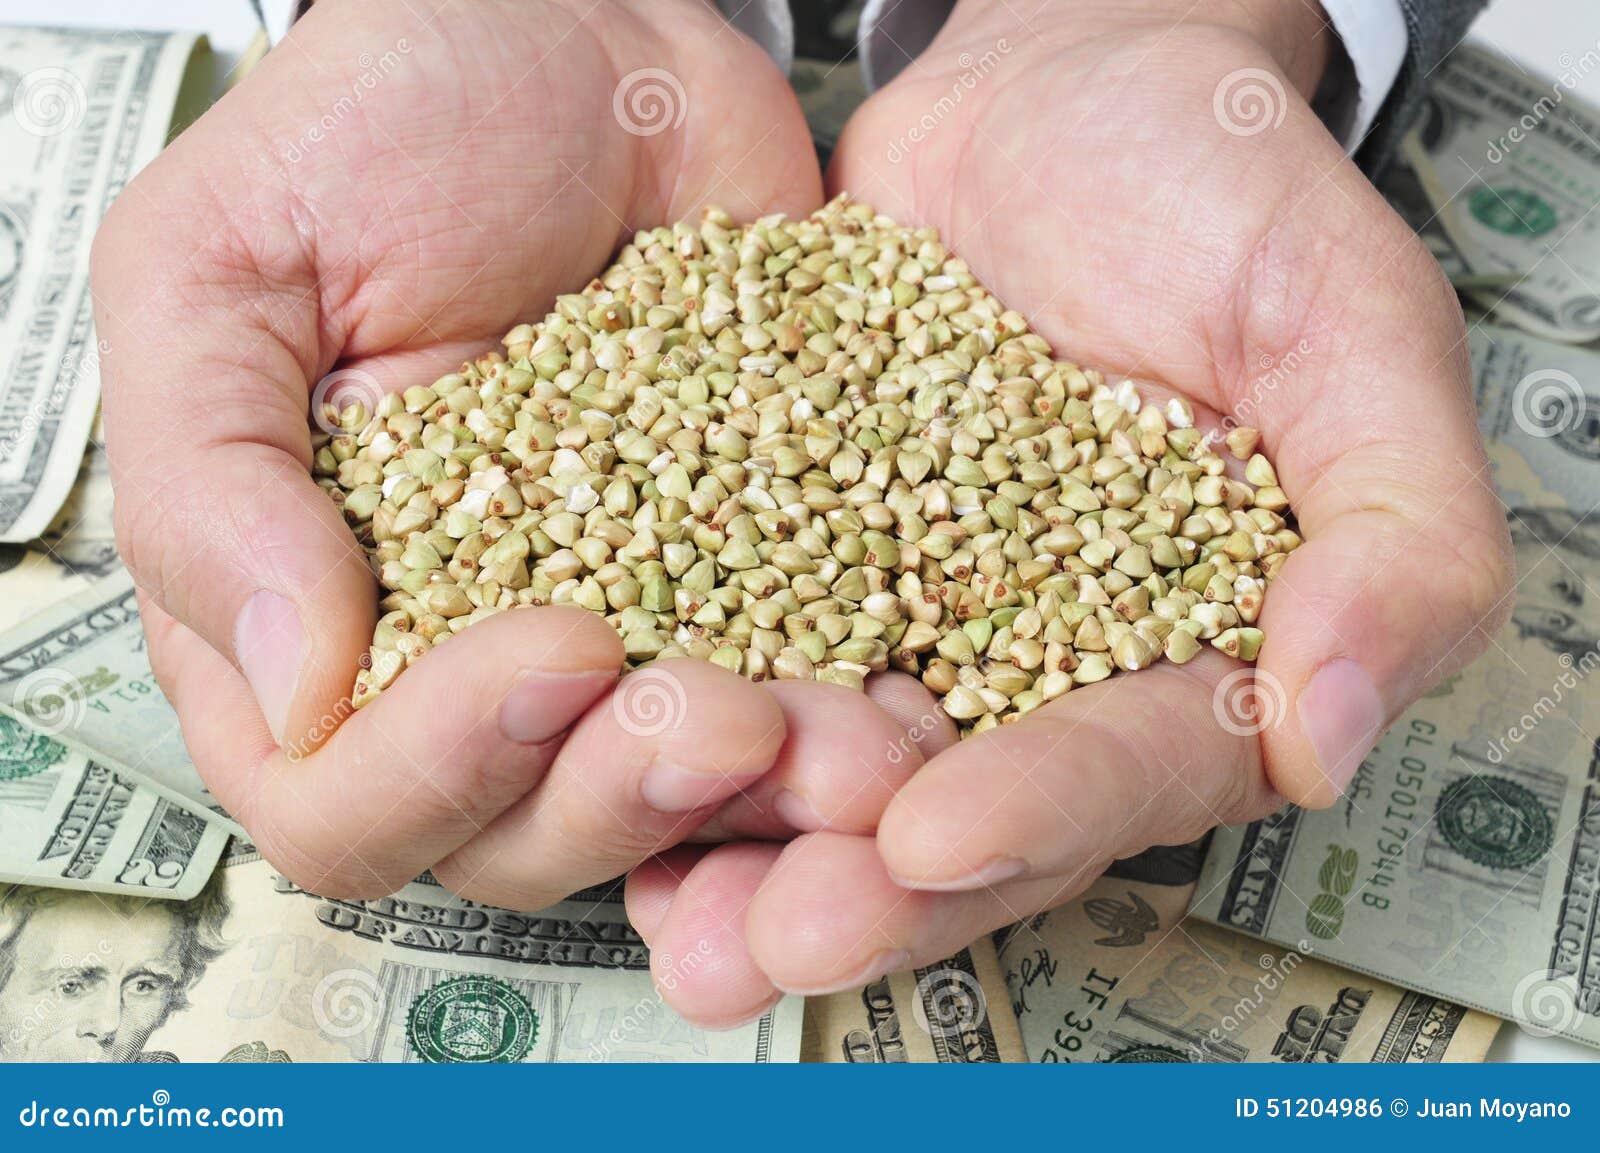 buckwheat seeds and dollar banknotes, depicting the agribusiness